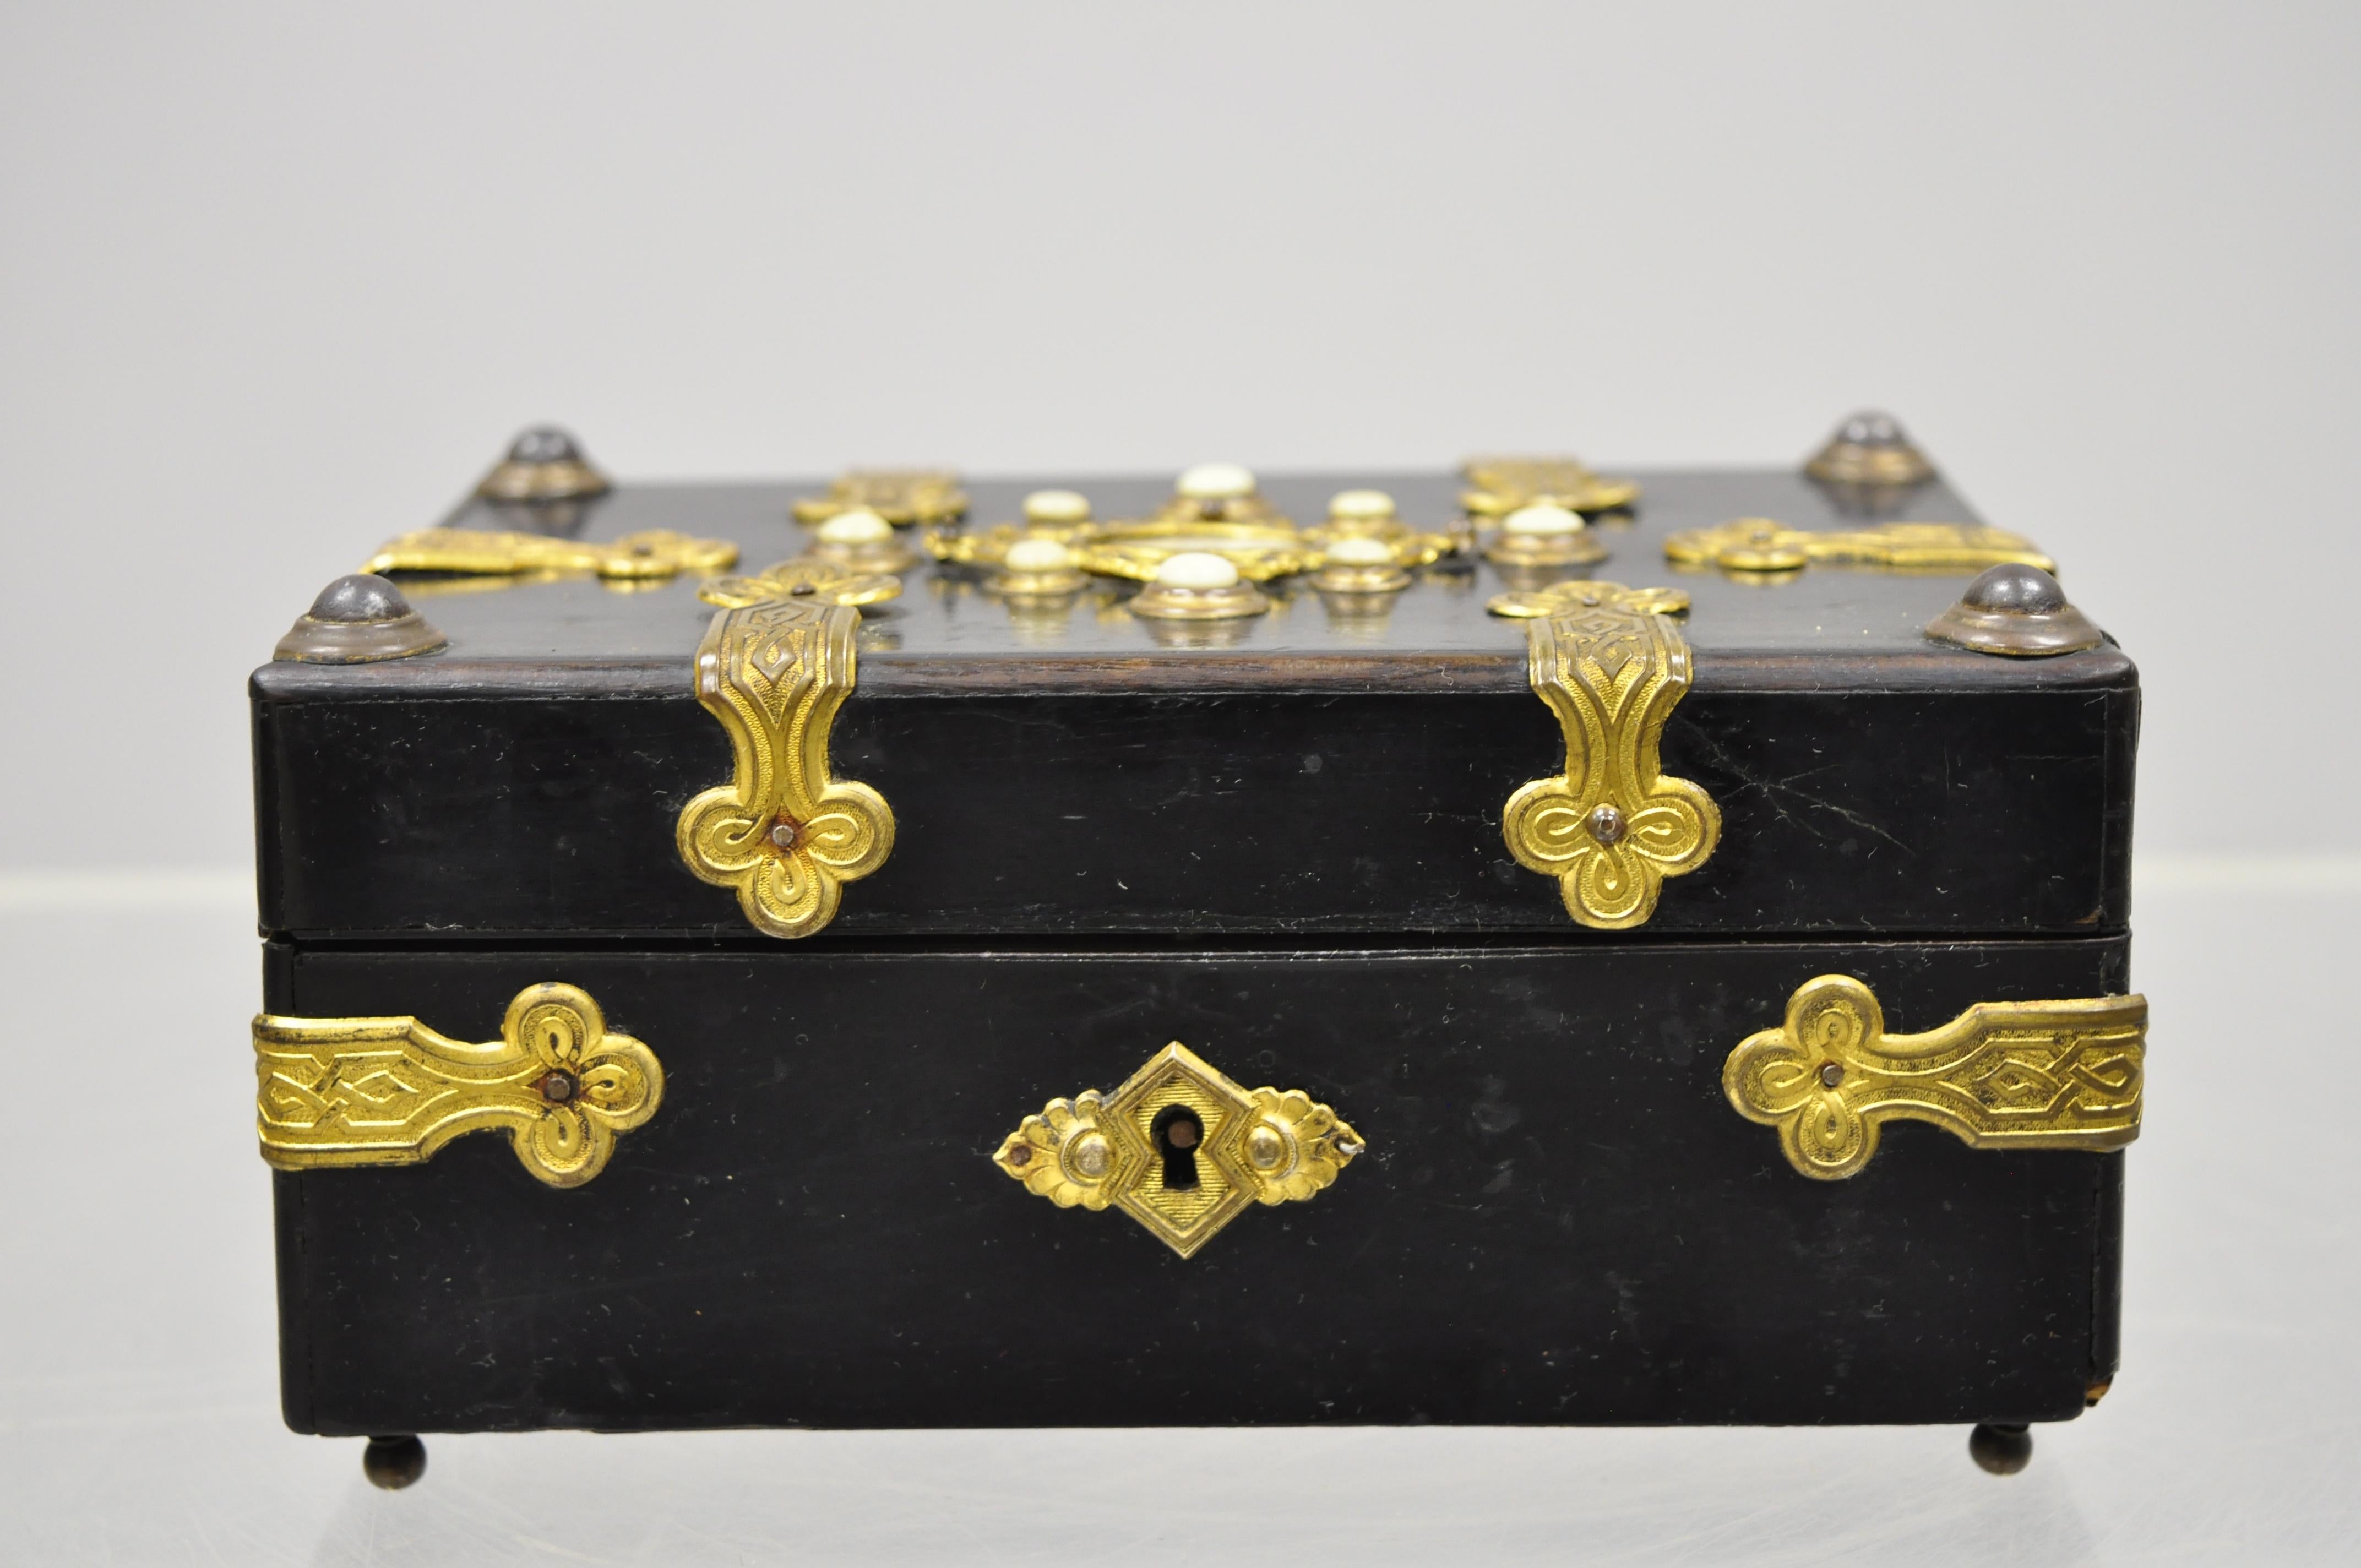 19th century antique English ebonized brass bound jewelry trinket box. Item includes an engraved brass bound case, mother of pearl accents, felt lined interior, raised on small feet, no key, but unlocked, very nice antique item, circa late 19th